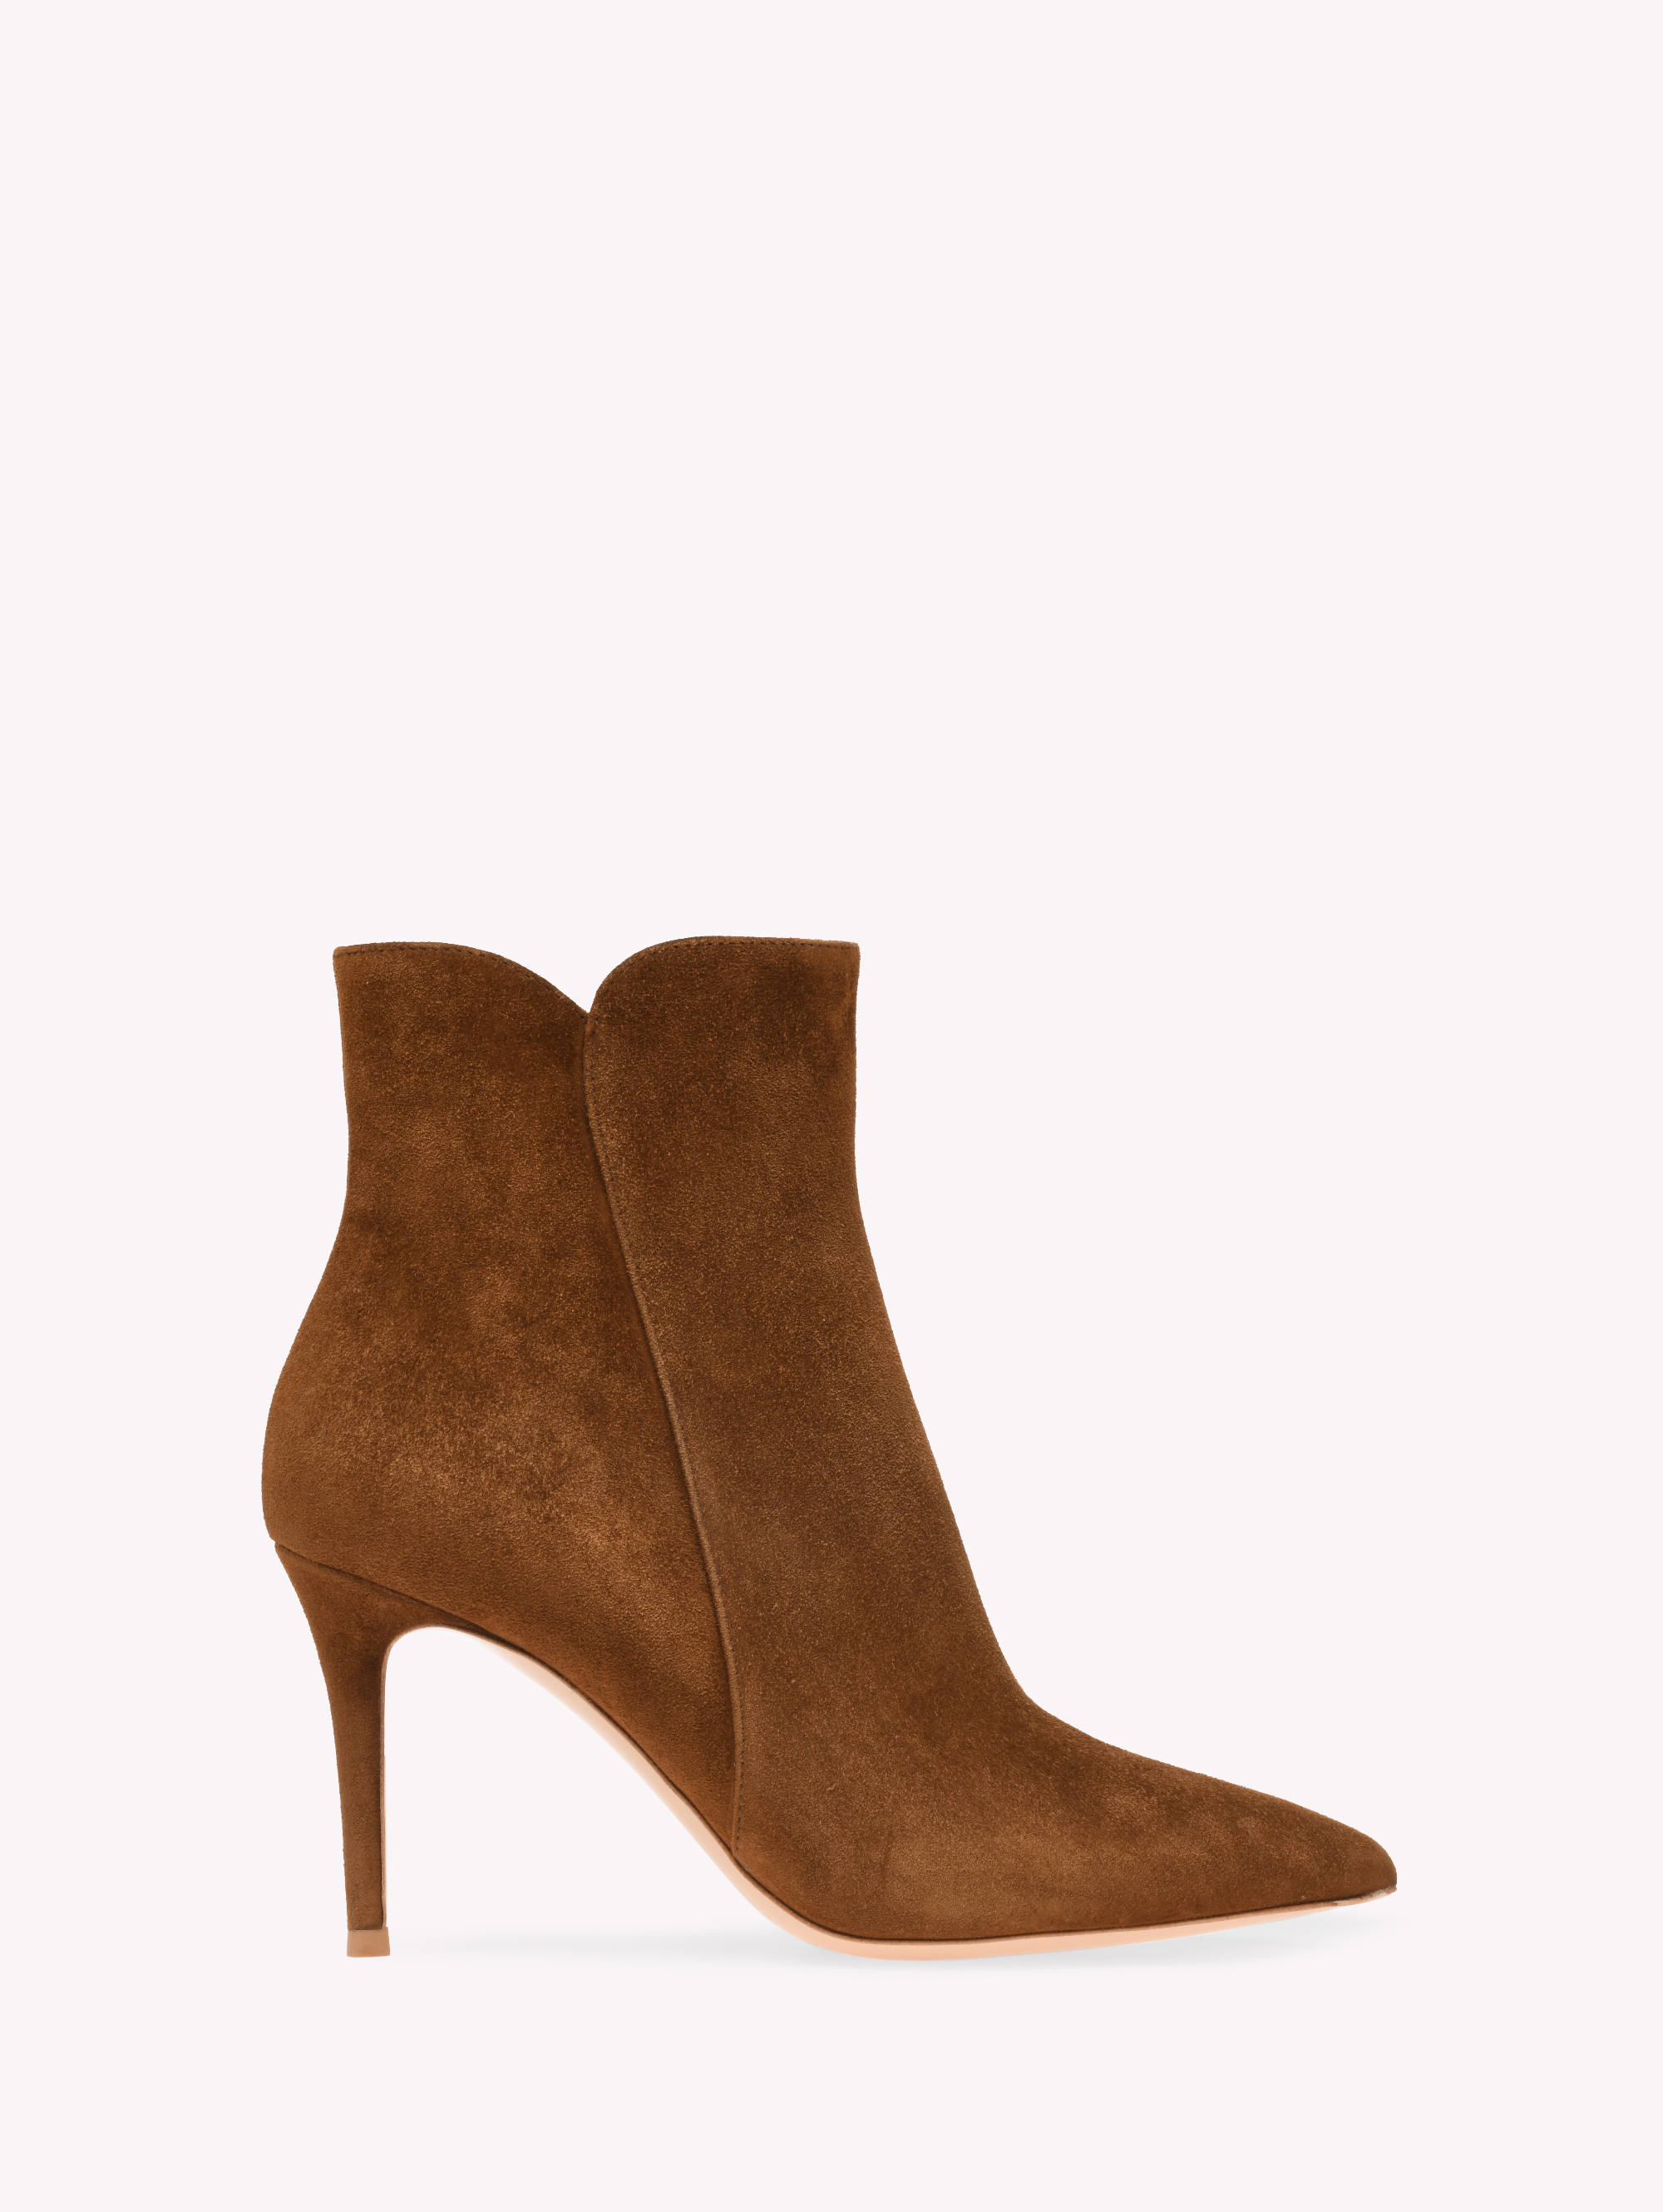 Ankle Boots for Women LEVY 85 | Gianvito Rossi